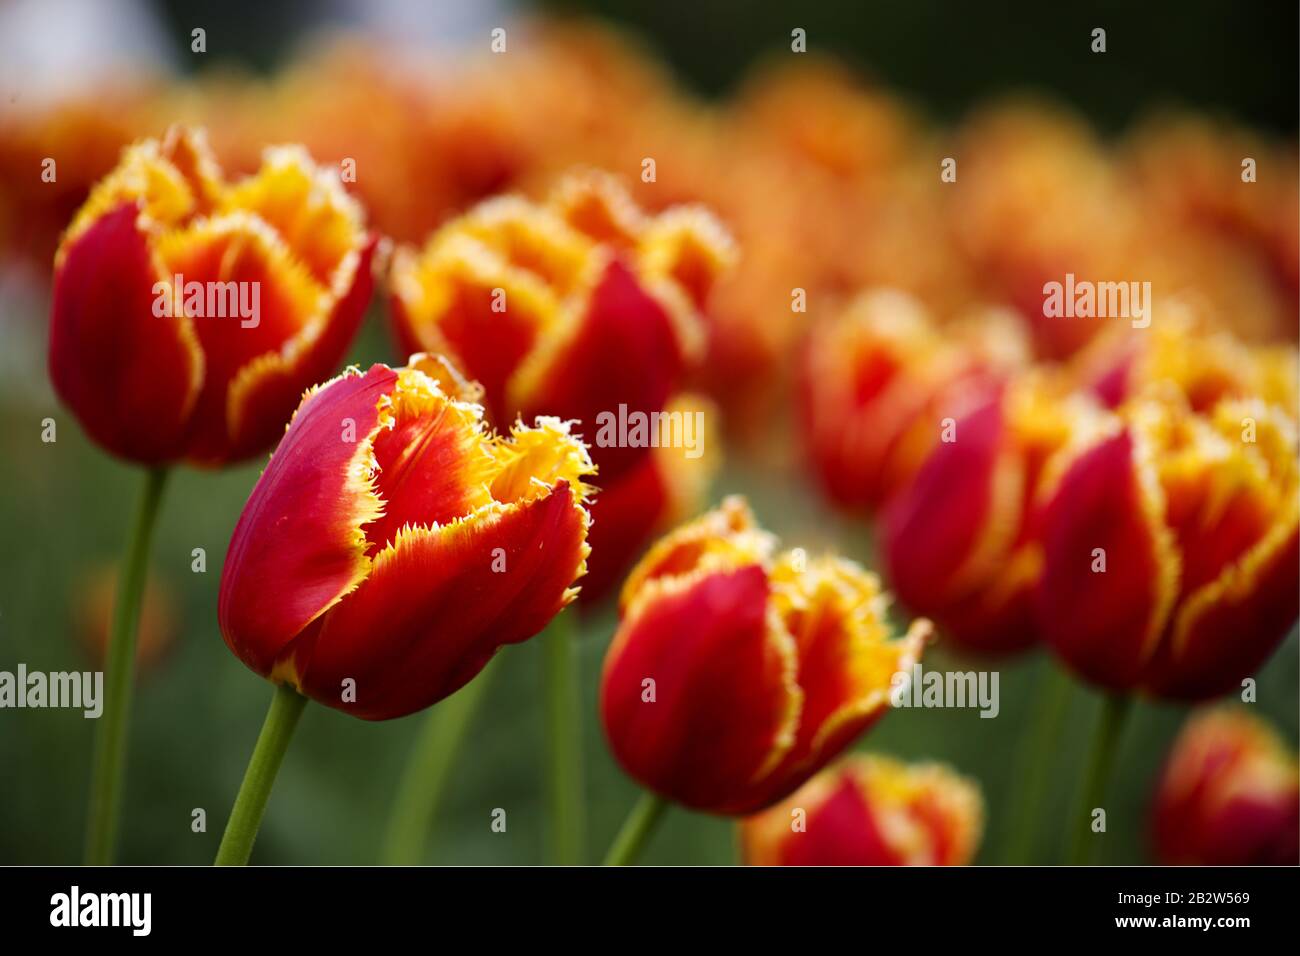 Blooming red tulips with a yellow border, selective focus. Stock Photo